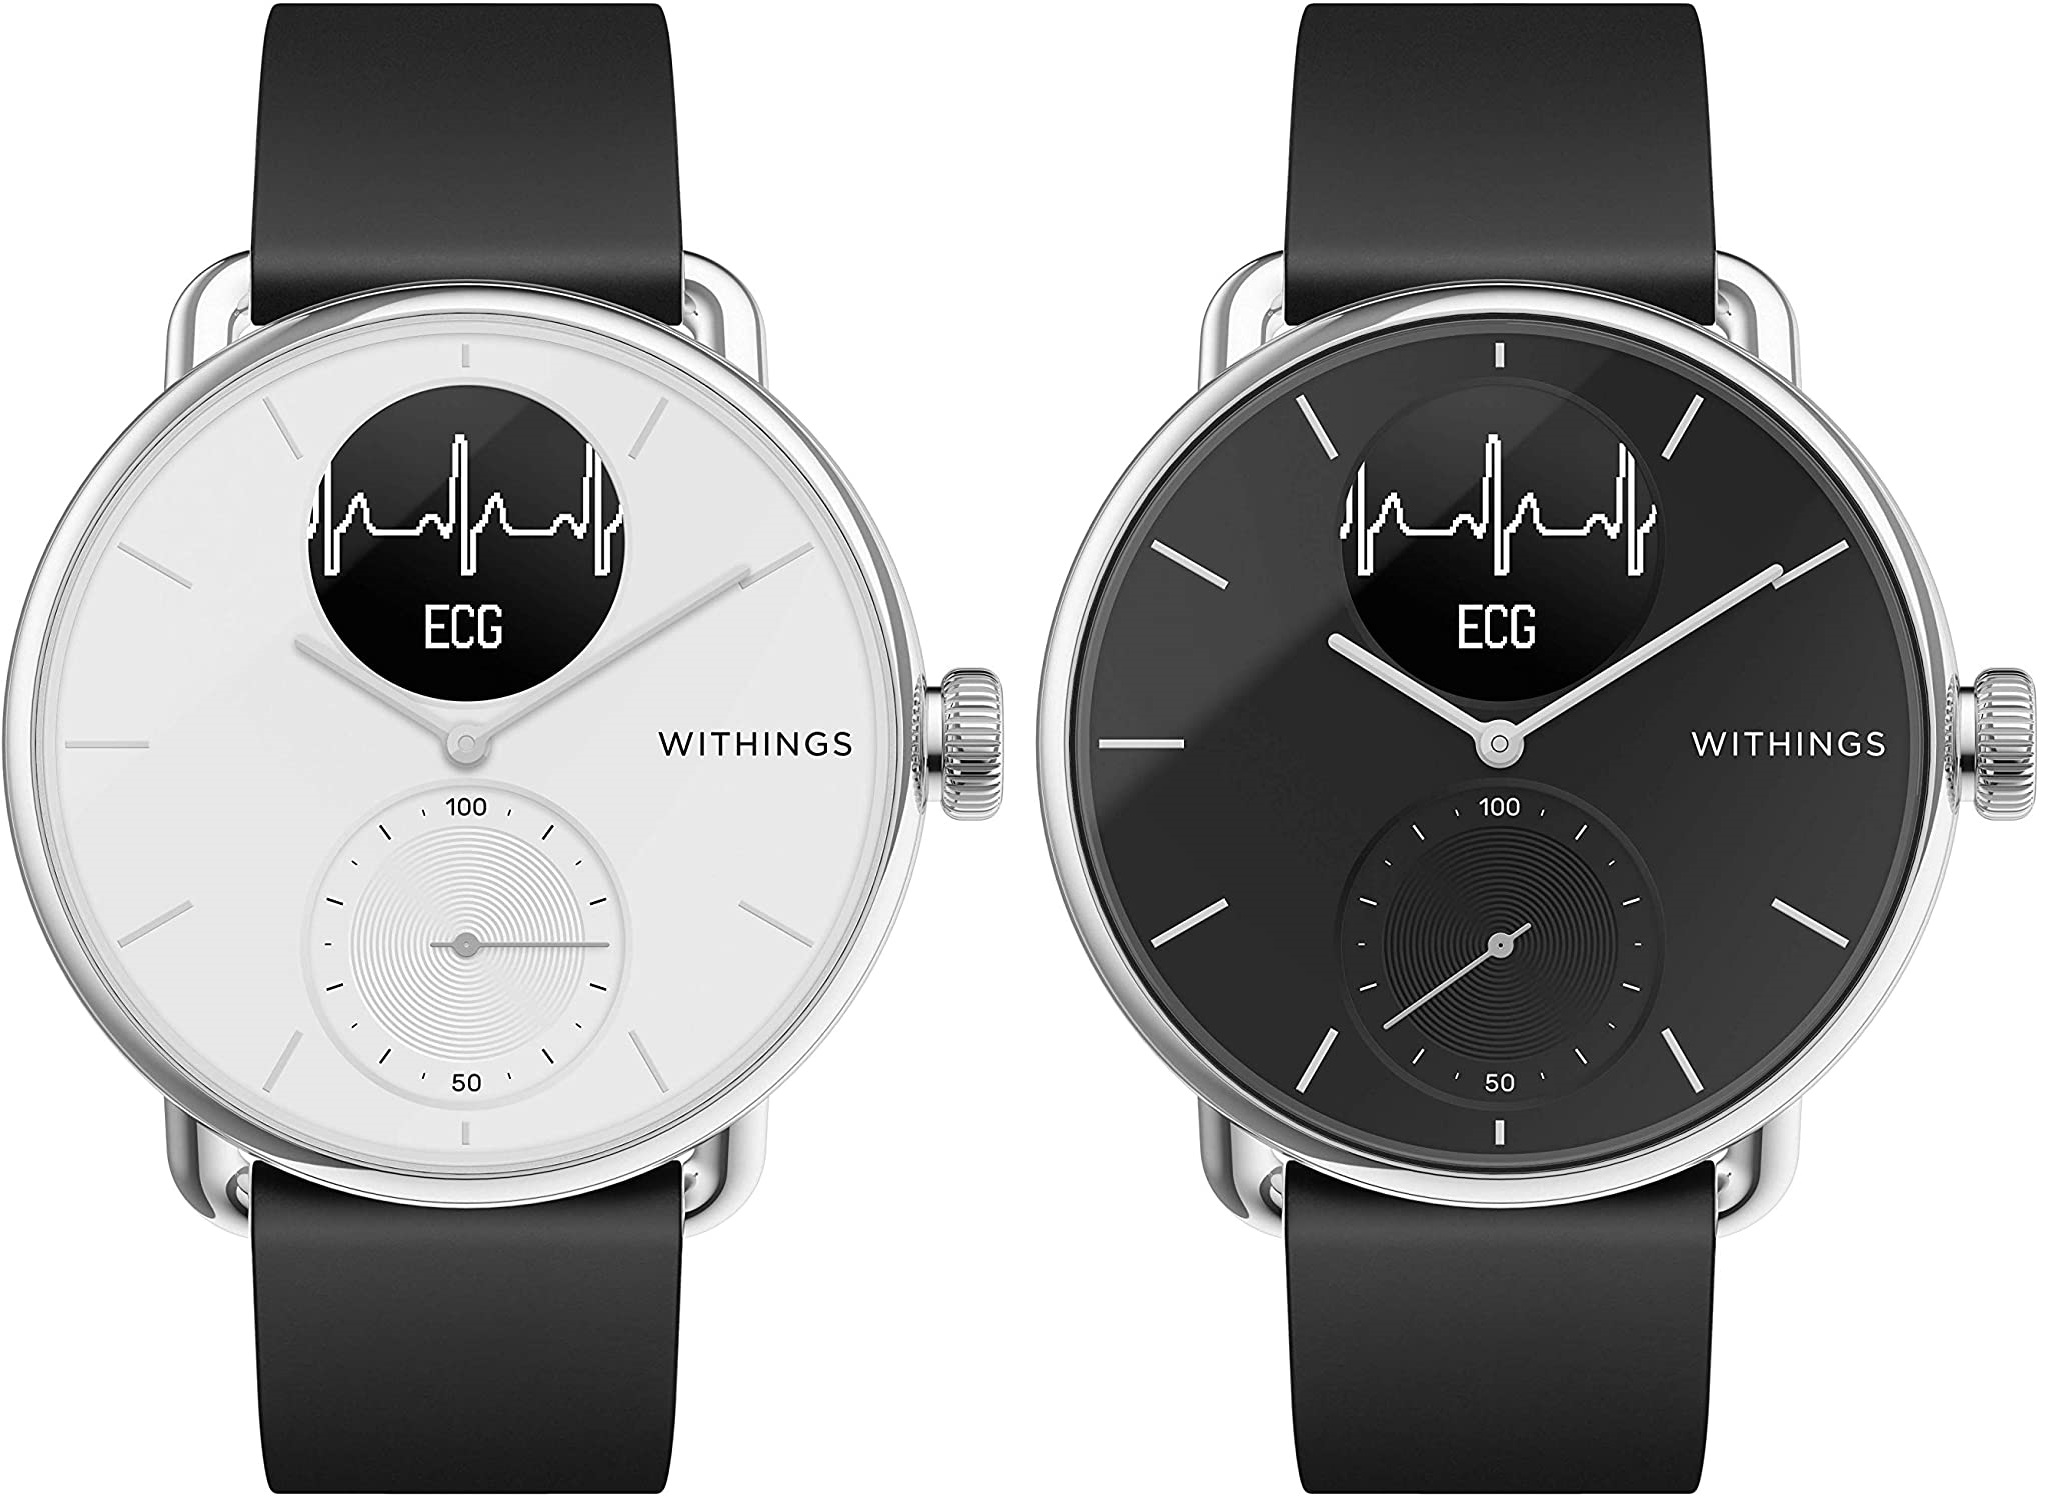 This new Withings smartwatch puts the Apple Watch to shame | Digital Trends